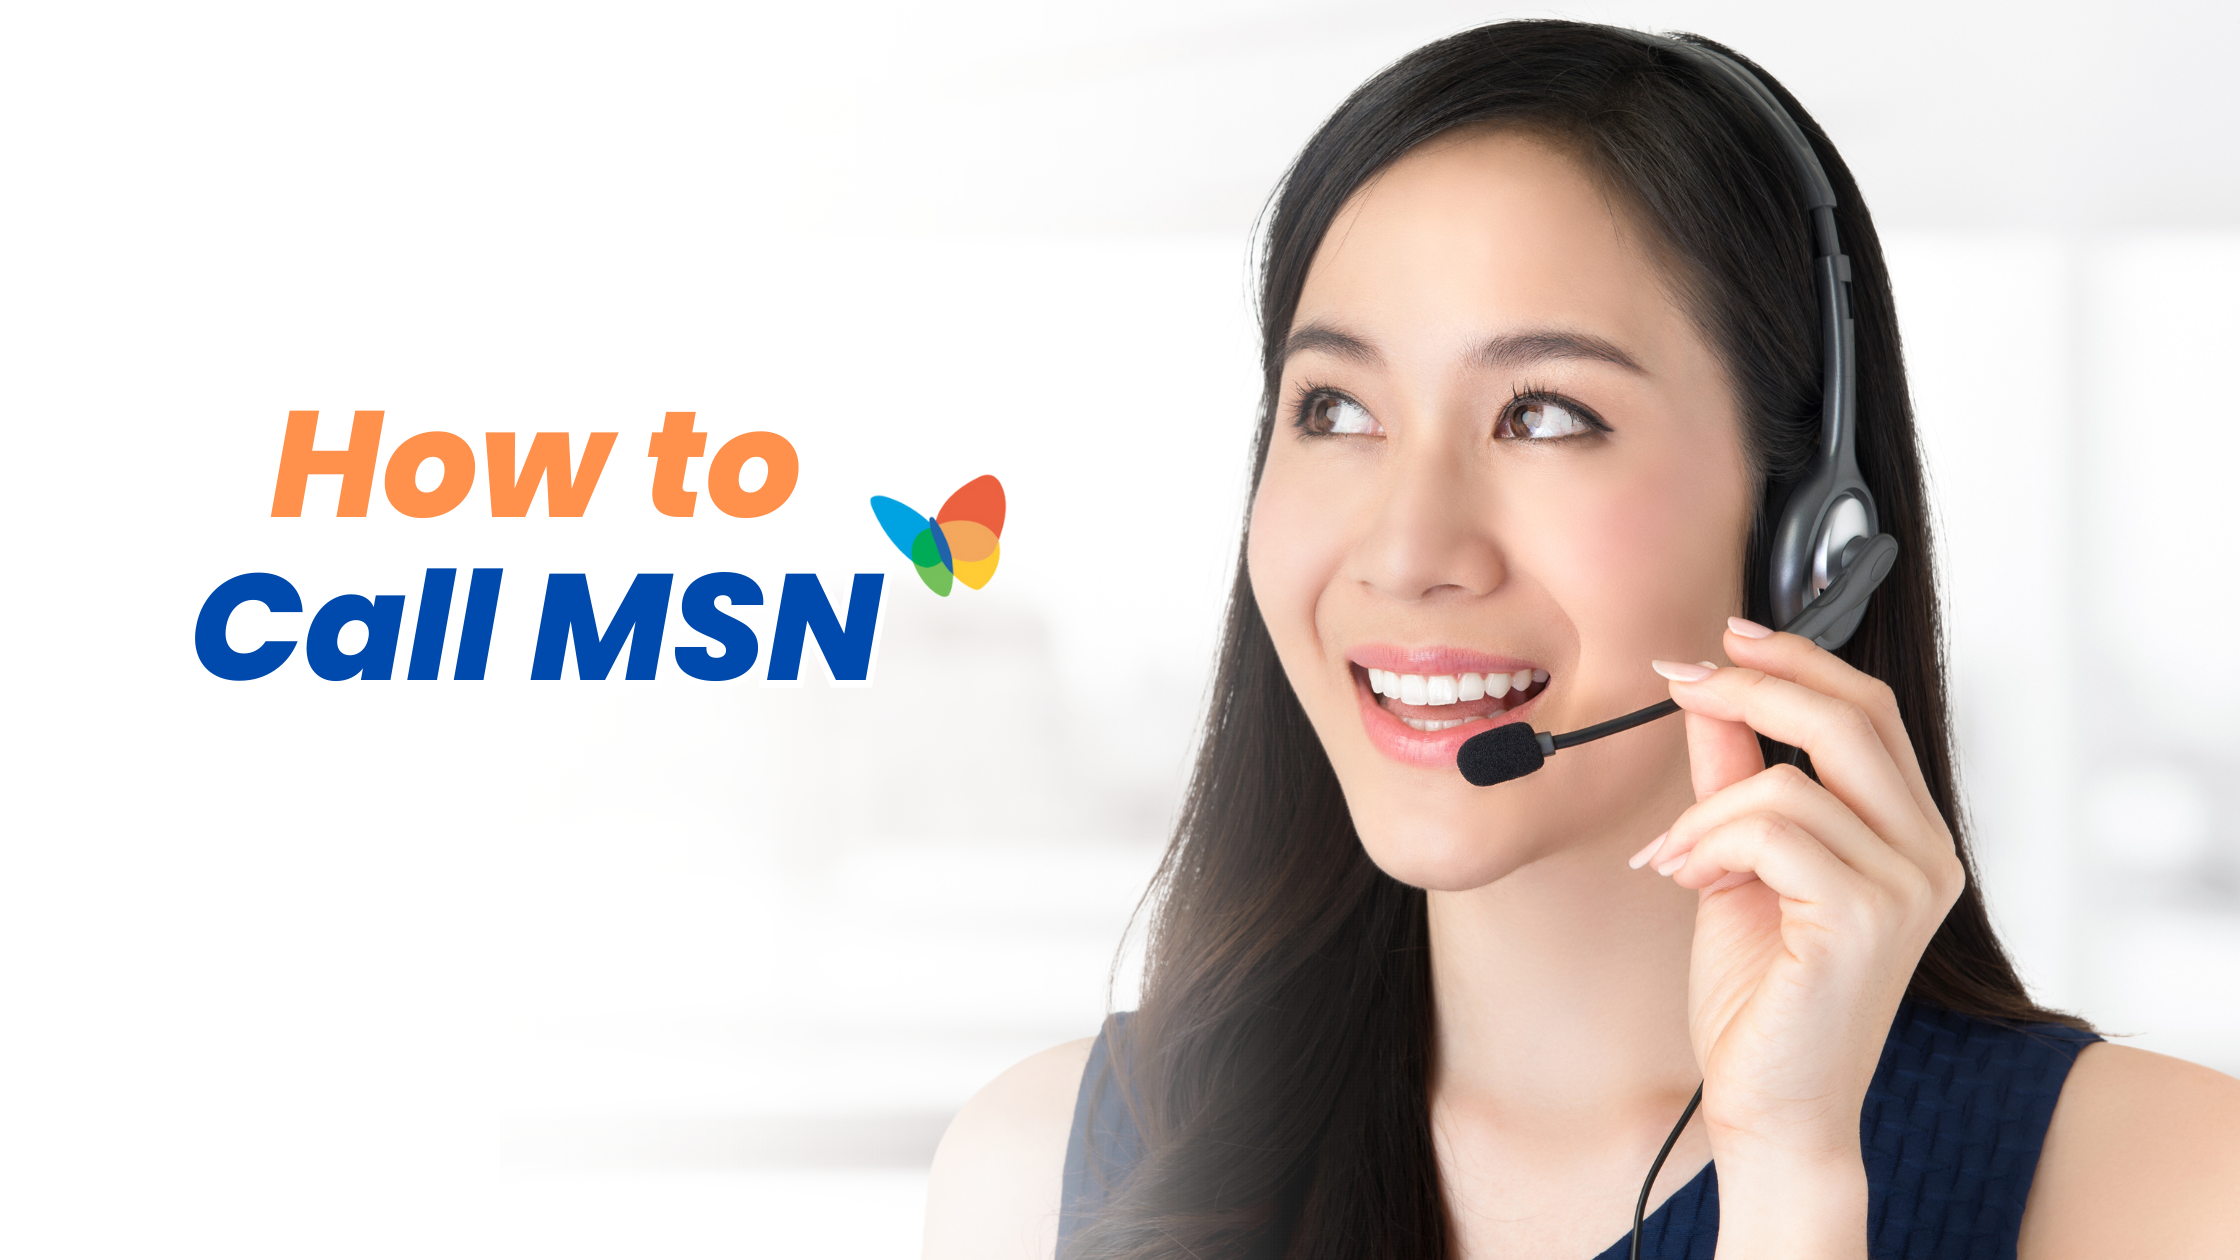 Learn How to Call MSN in 3 Simple Steps